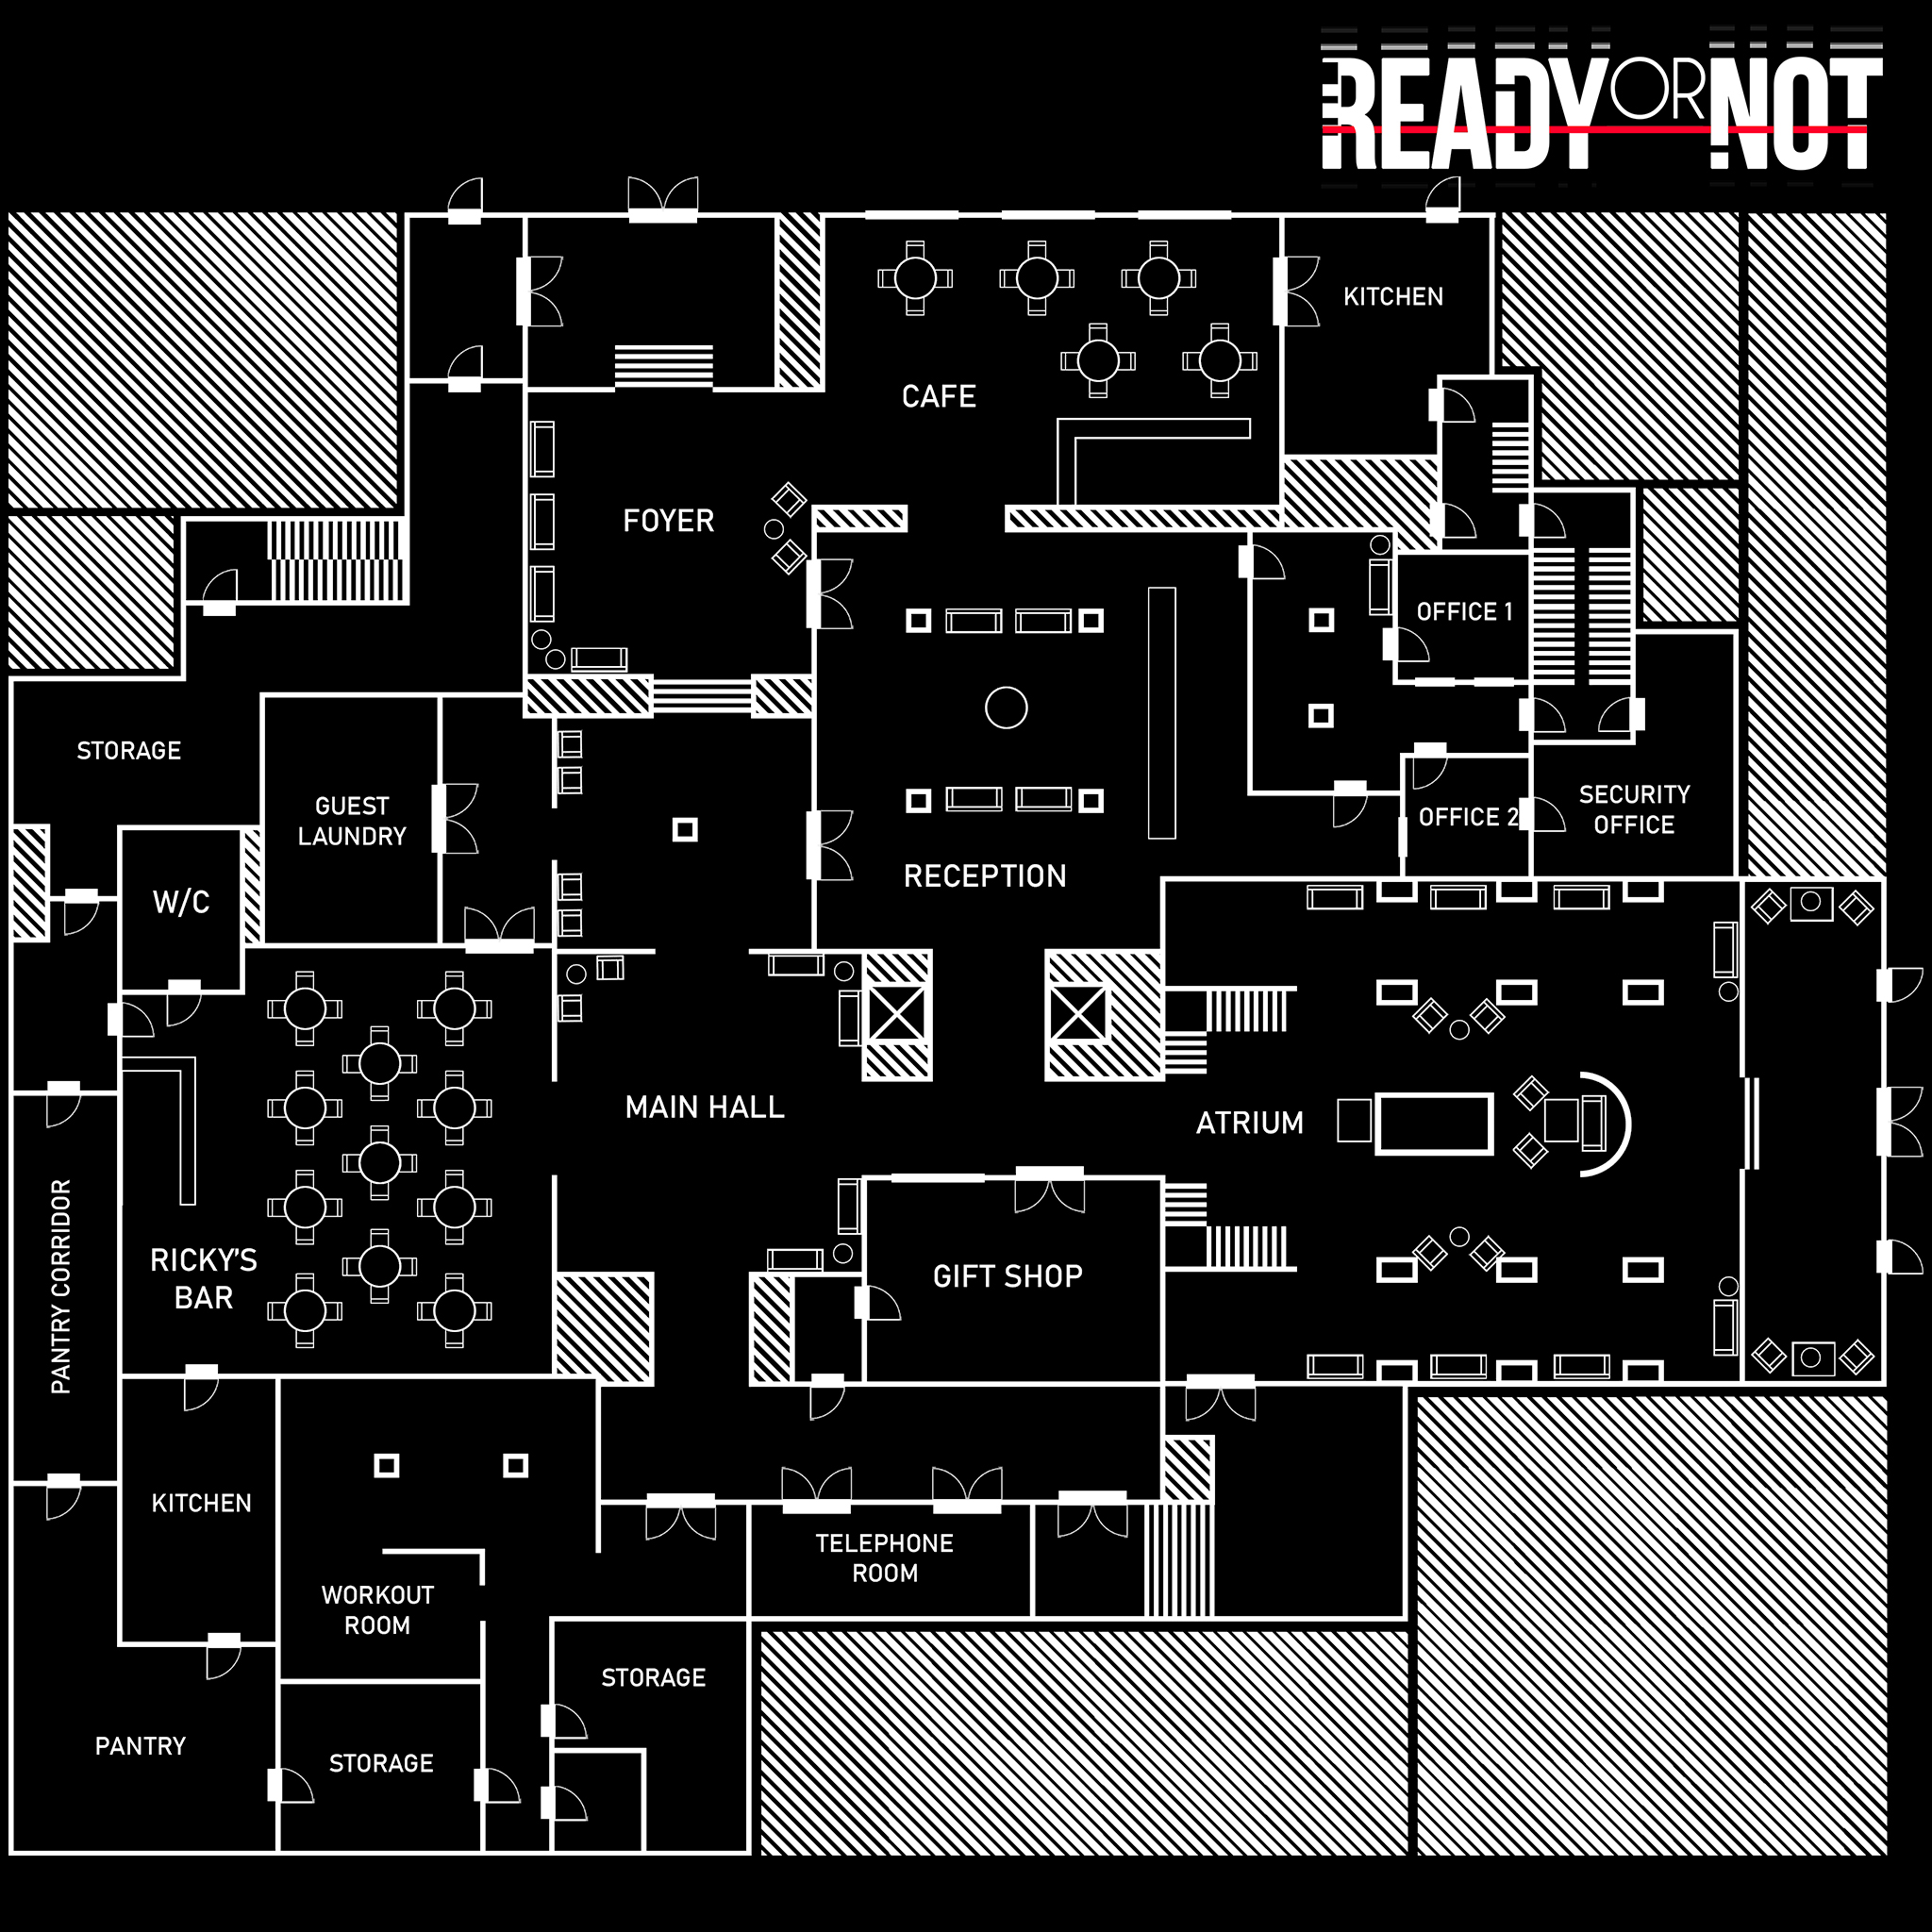 Ready or Not Map Information Guide - Wenderly Hills Hotel - AA2EF5B